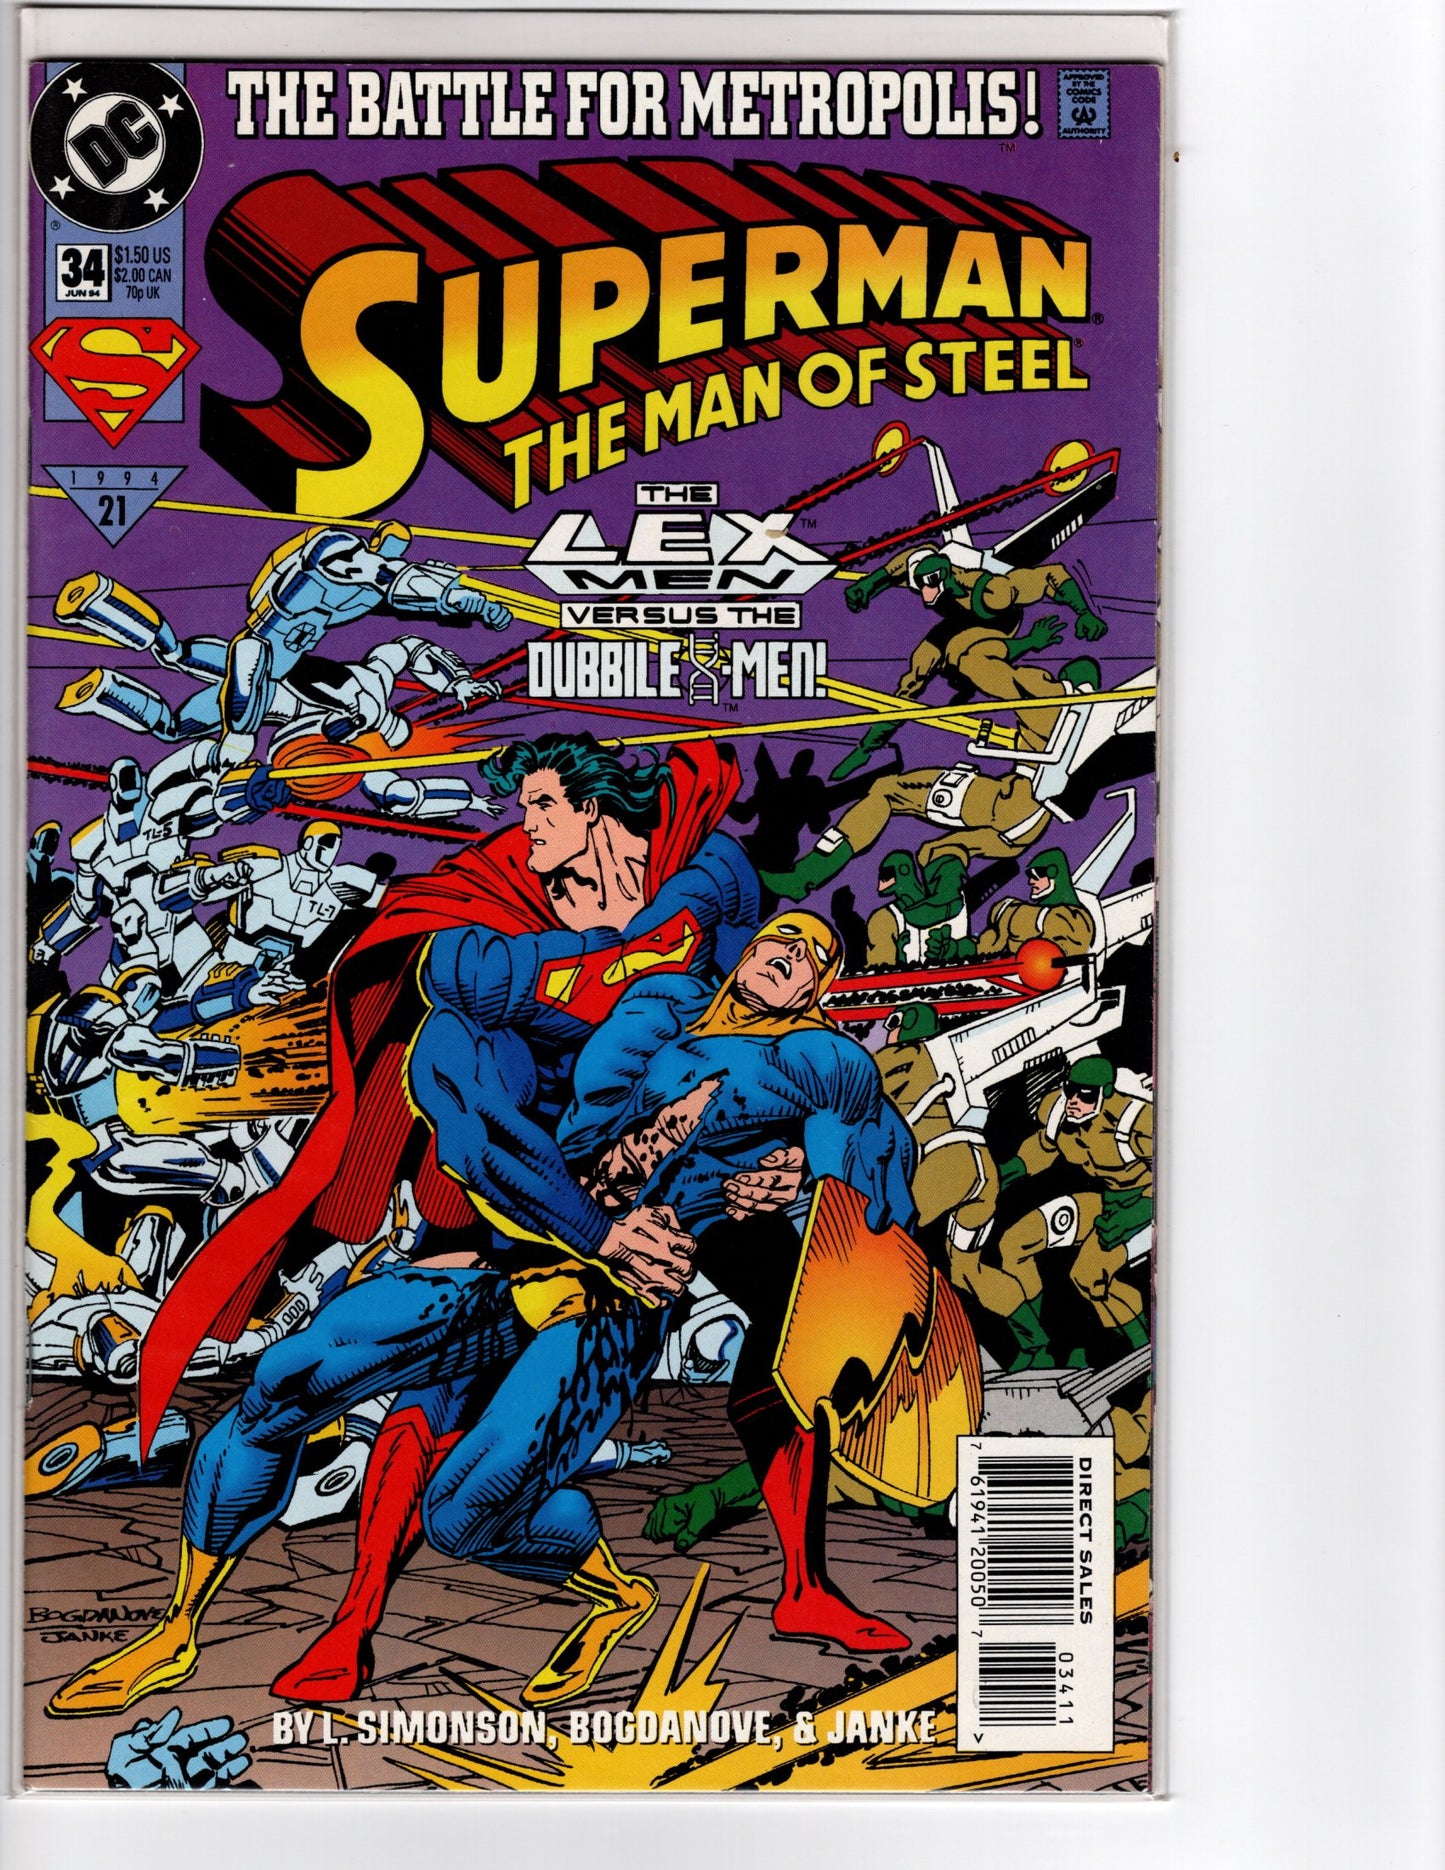 Superman - The Man of Steel No. 34